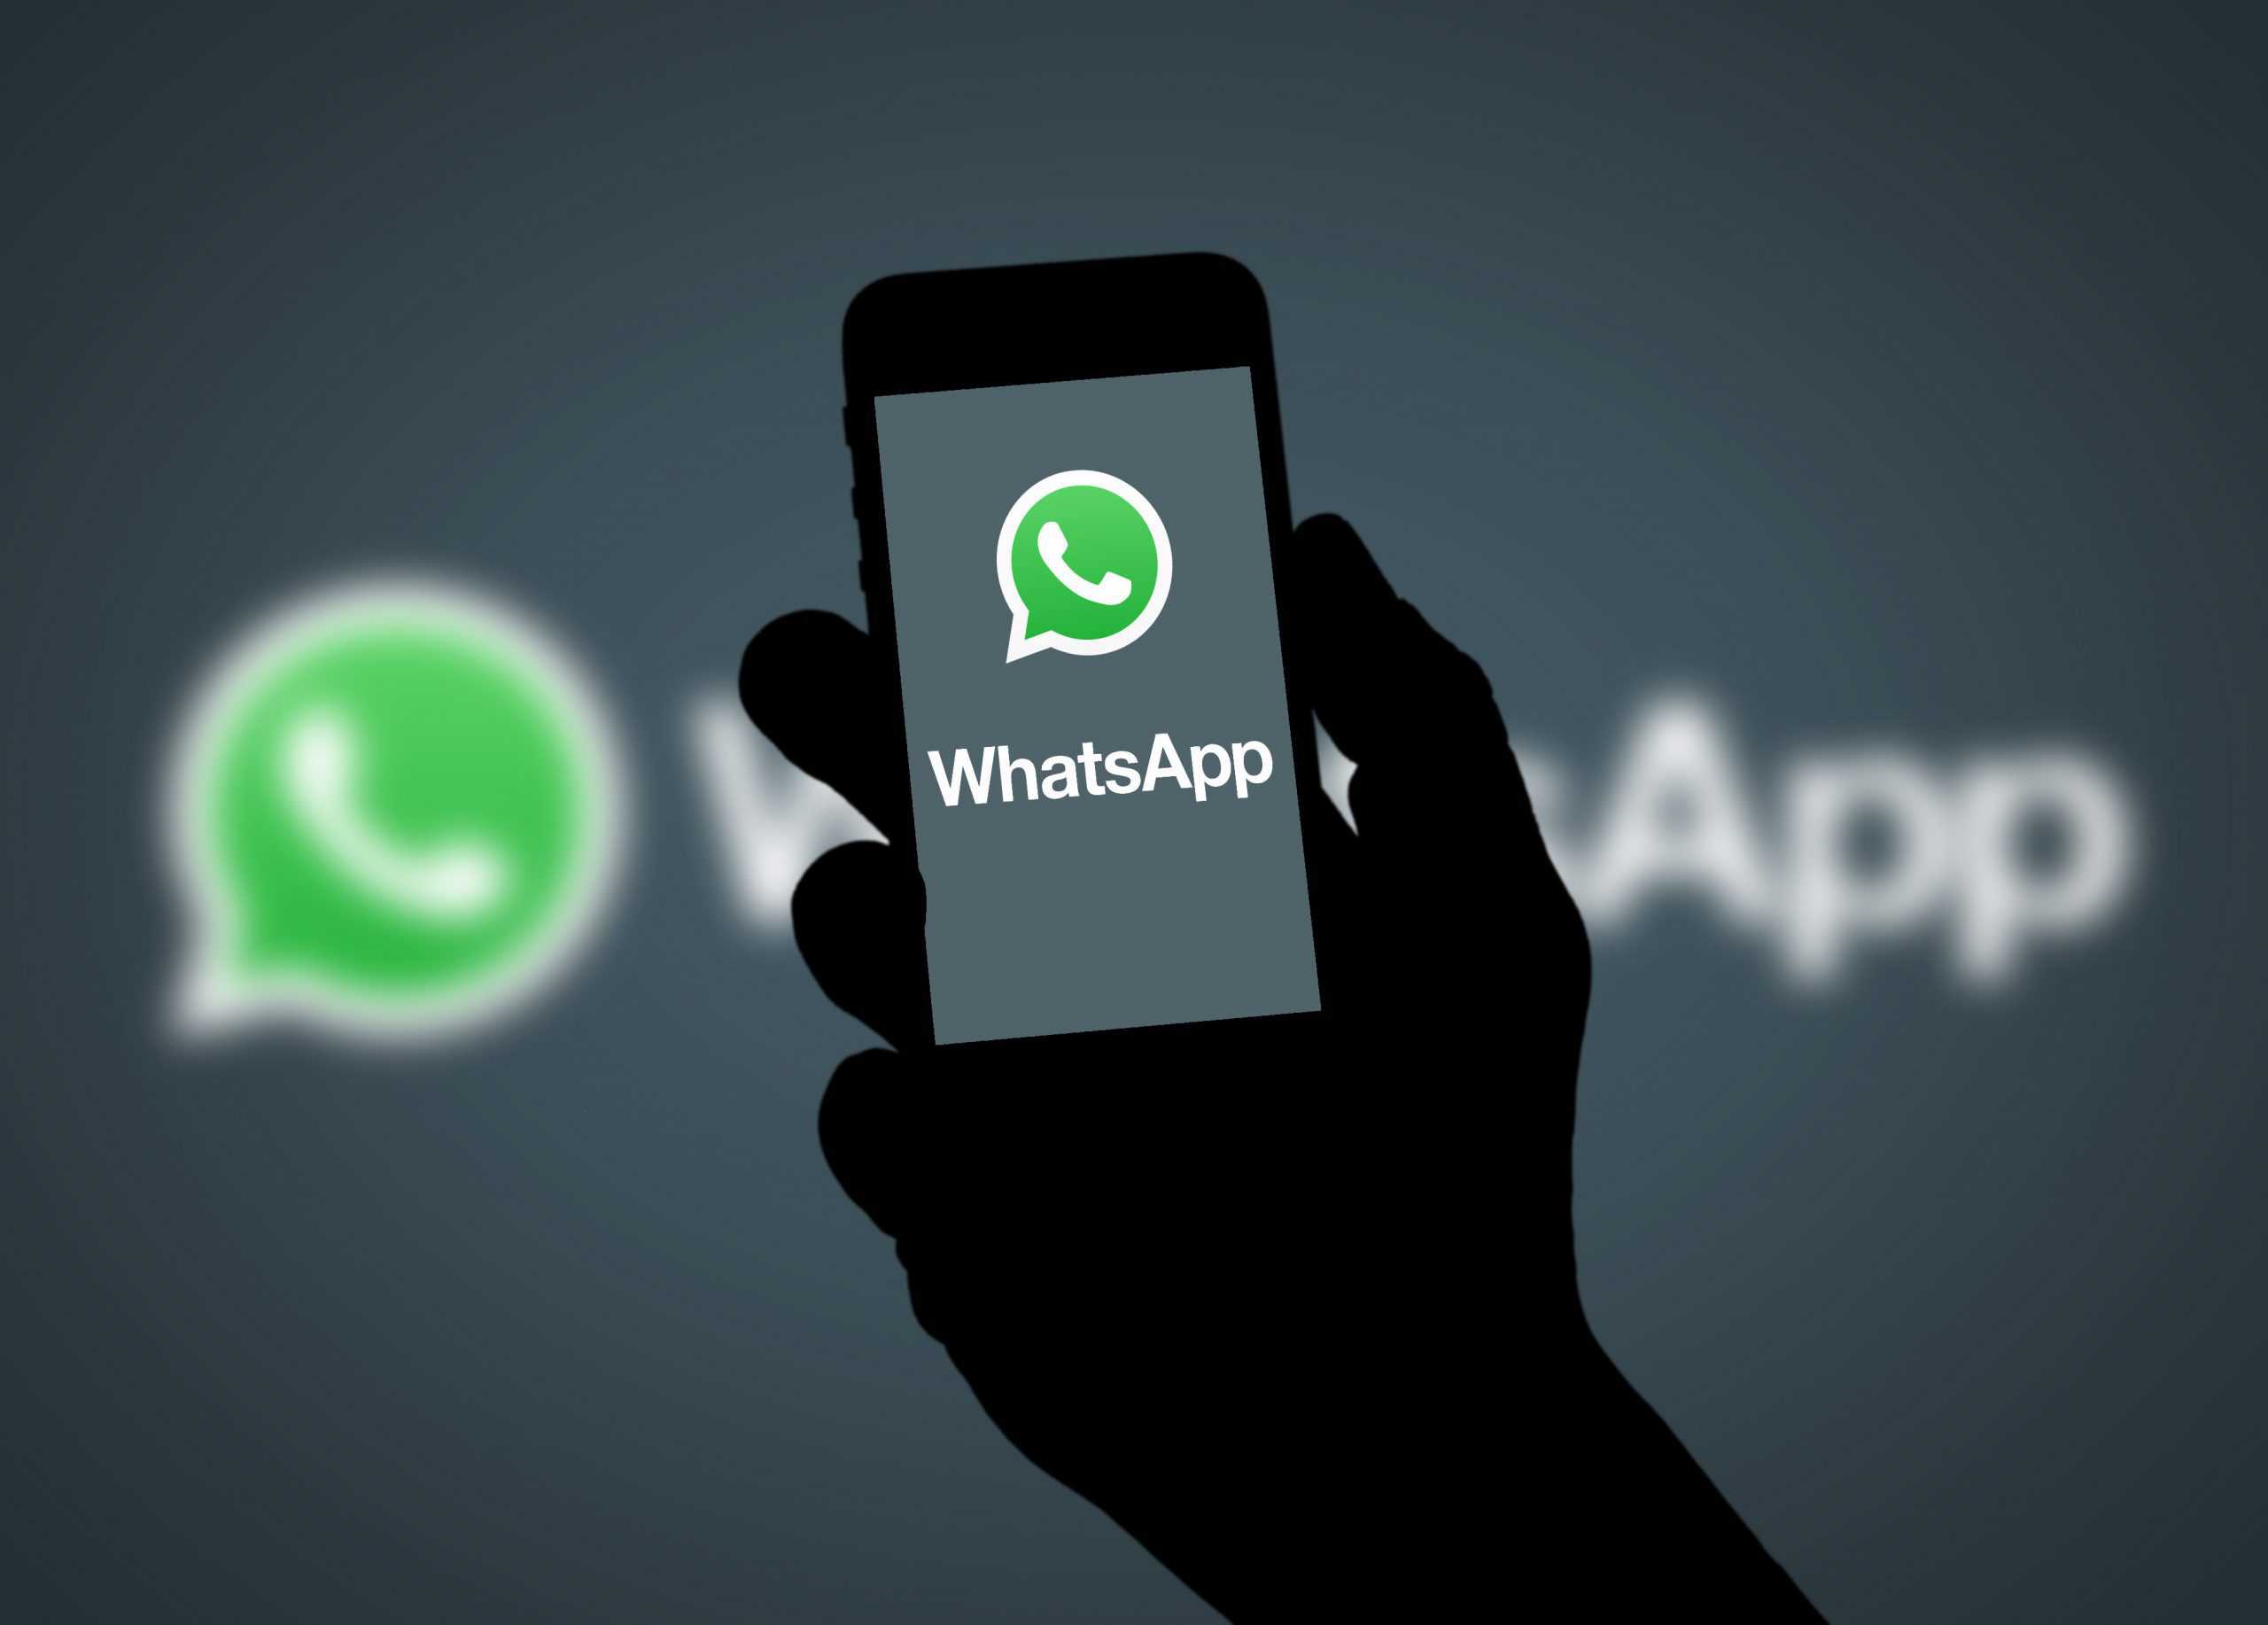 Be cautious of the Whatsapp scam. Whatsapp's screenshot blocking for View Once messaging